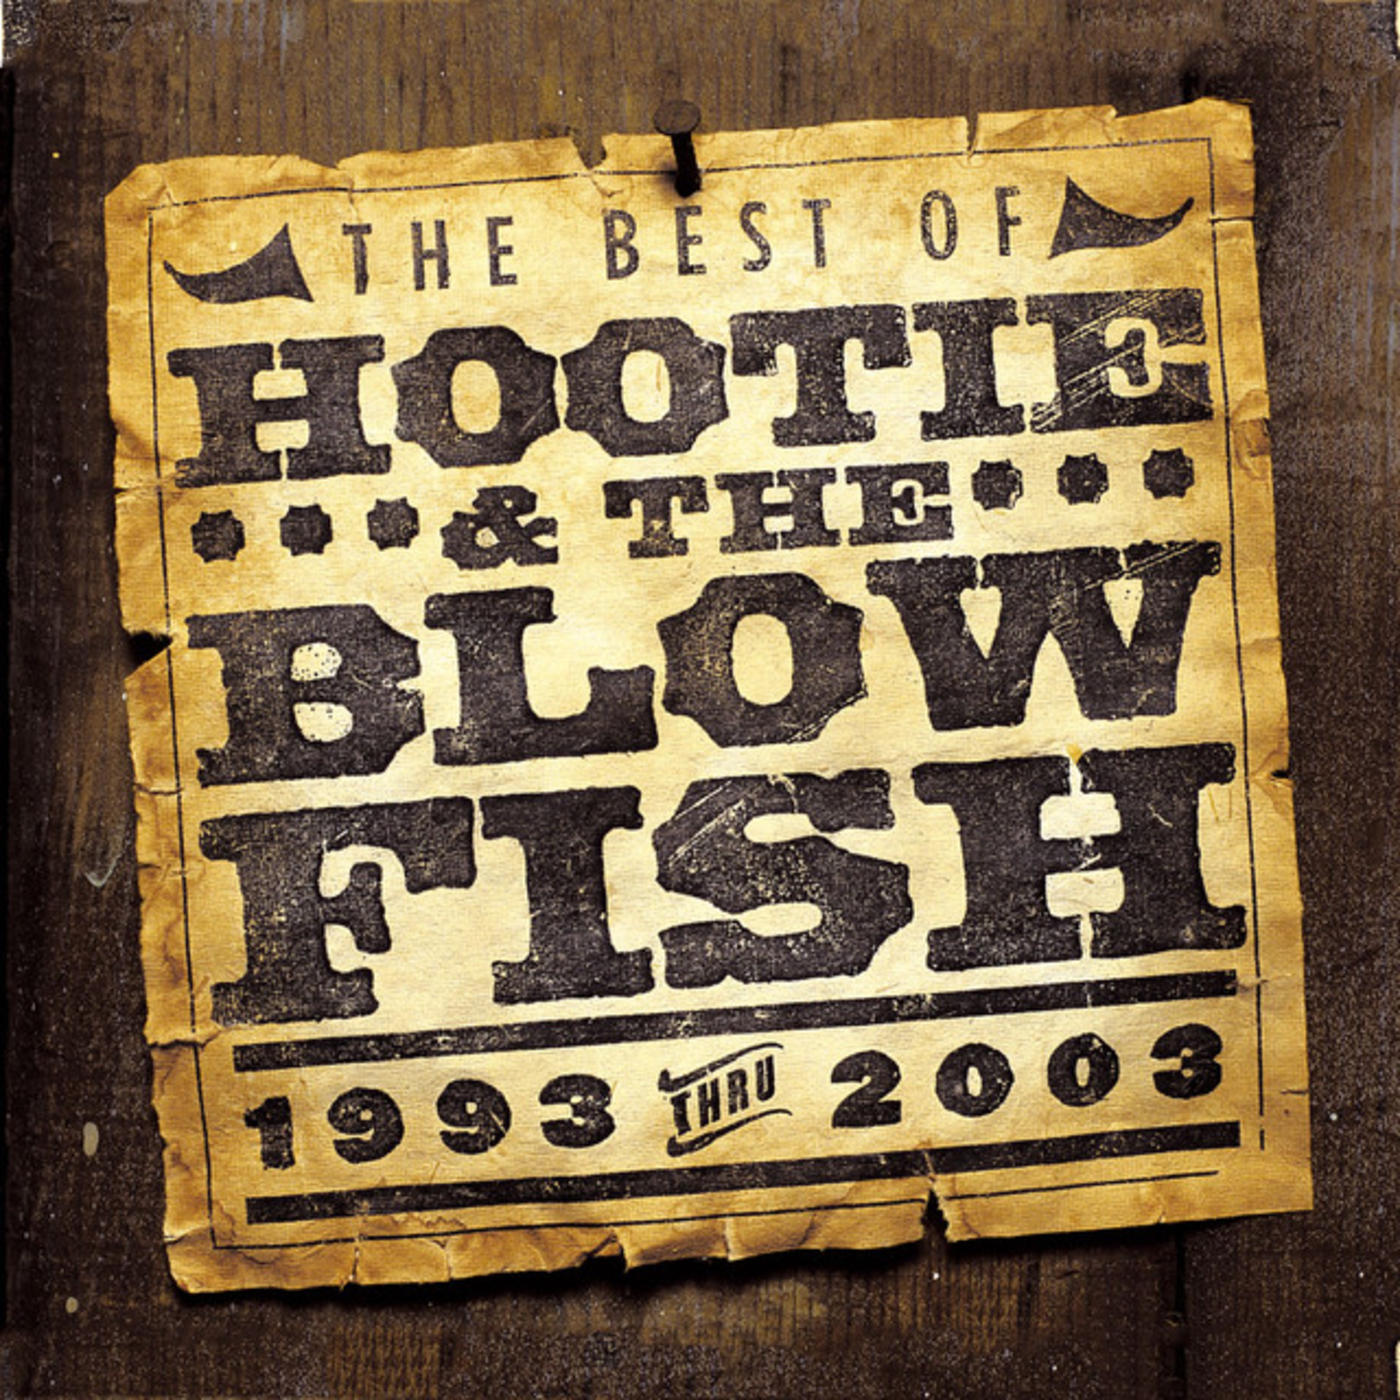 The Best of Hootie & The Blowfish (1993 - 2003) [US Release]